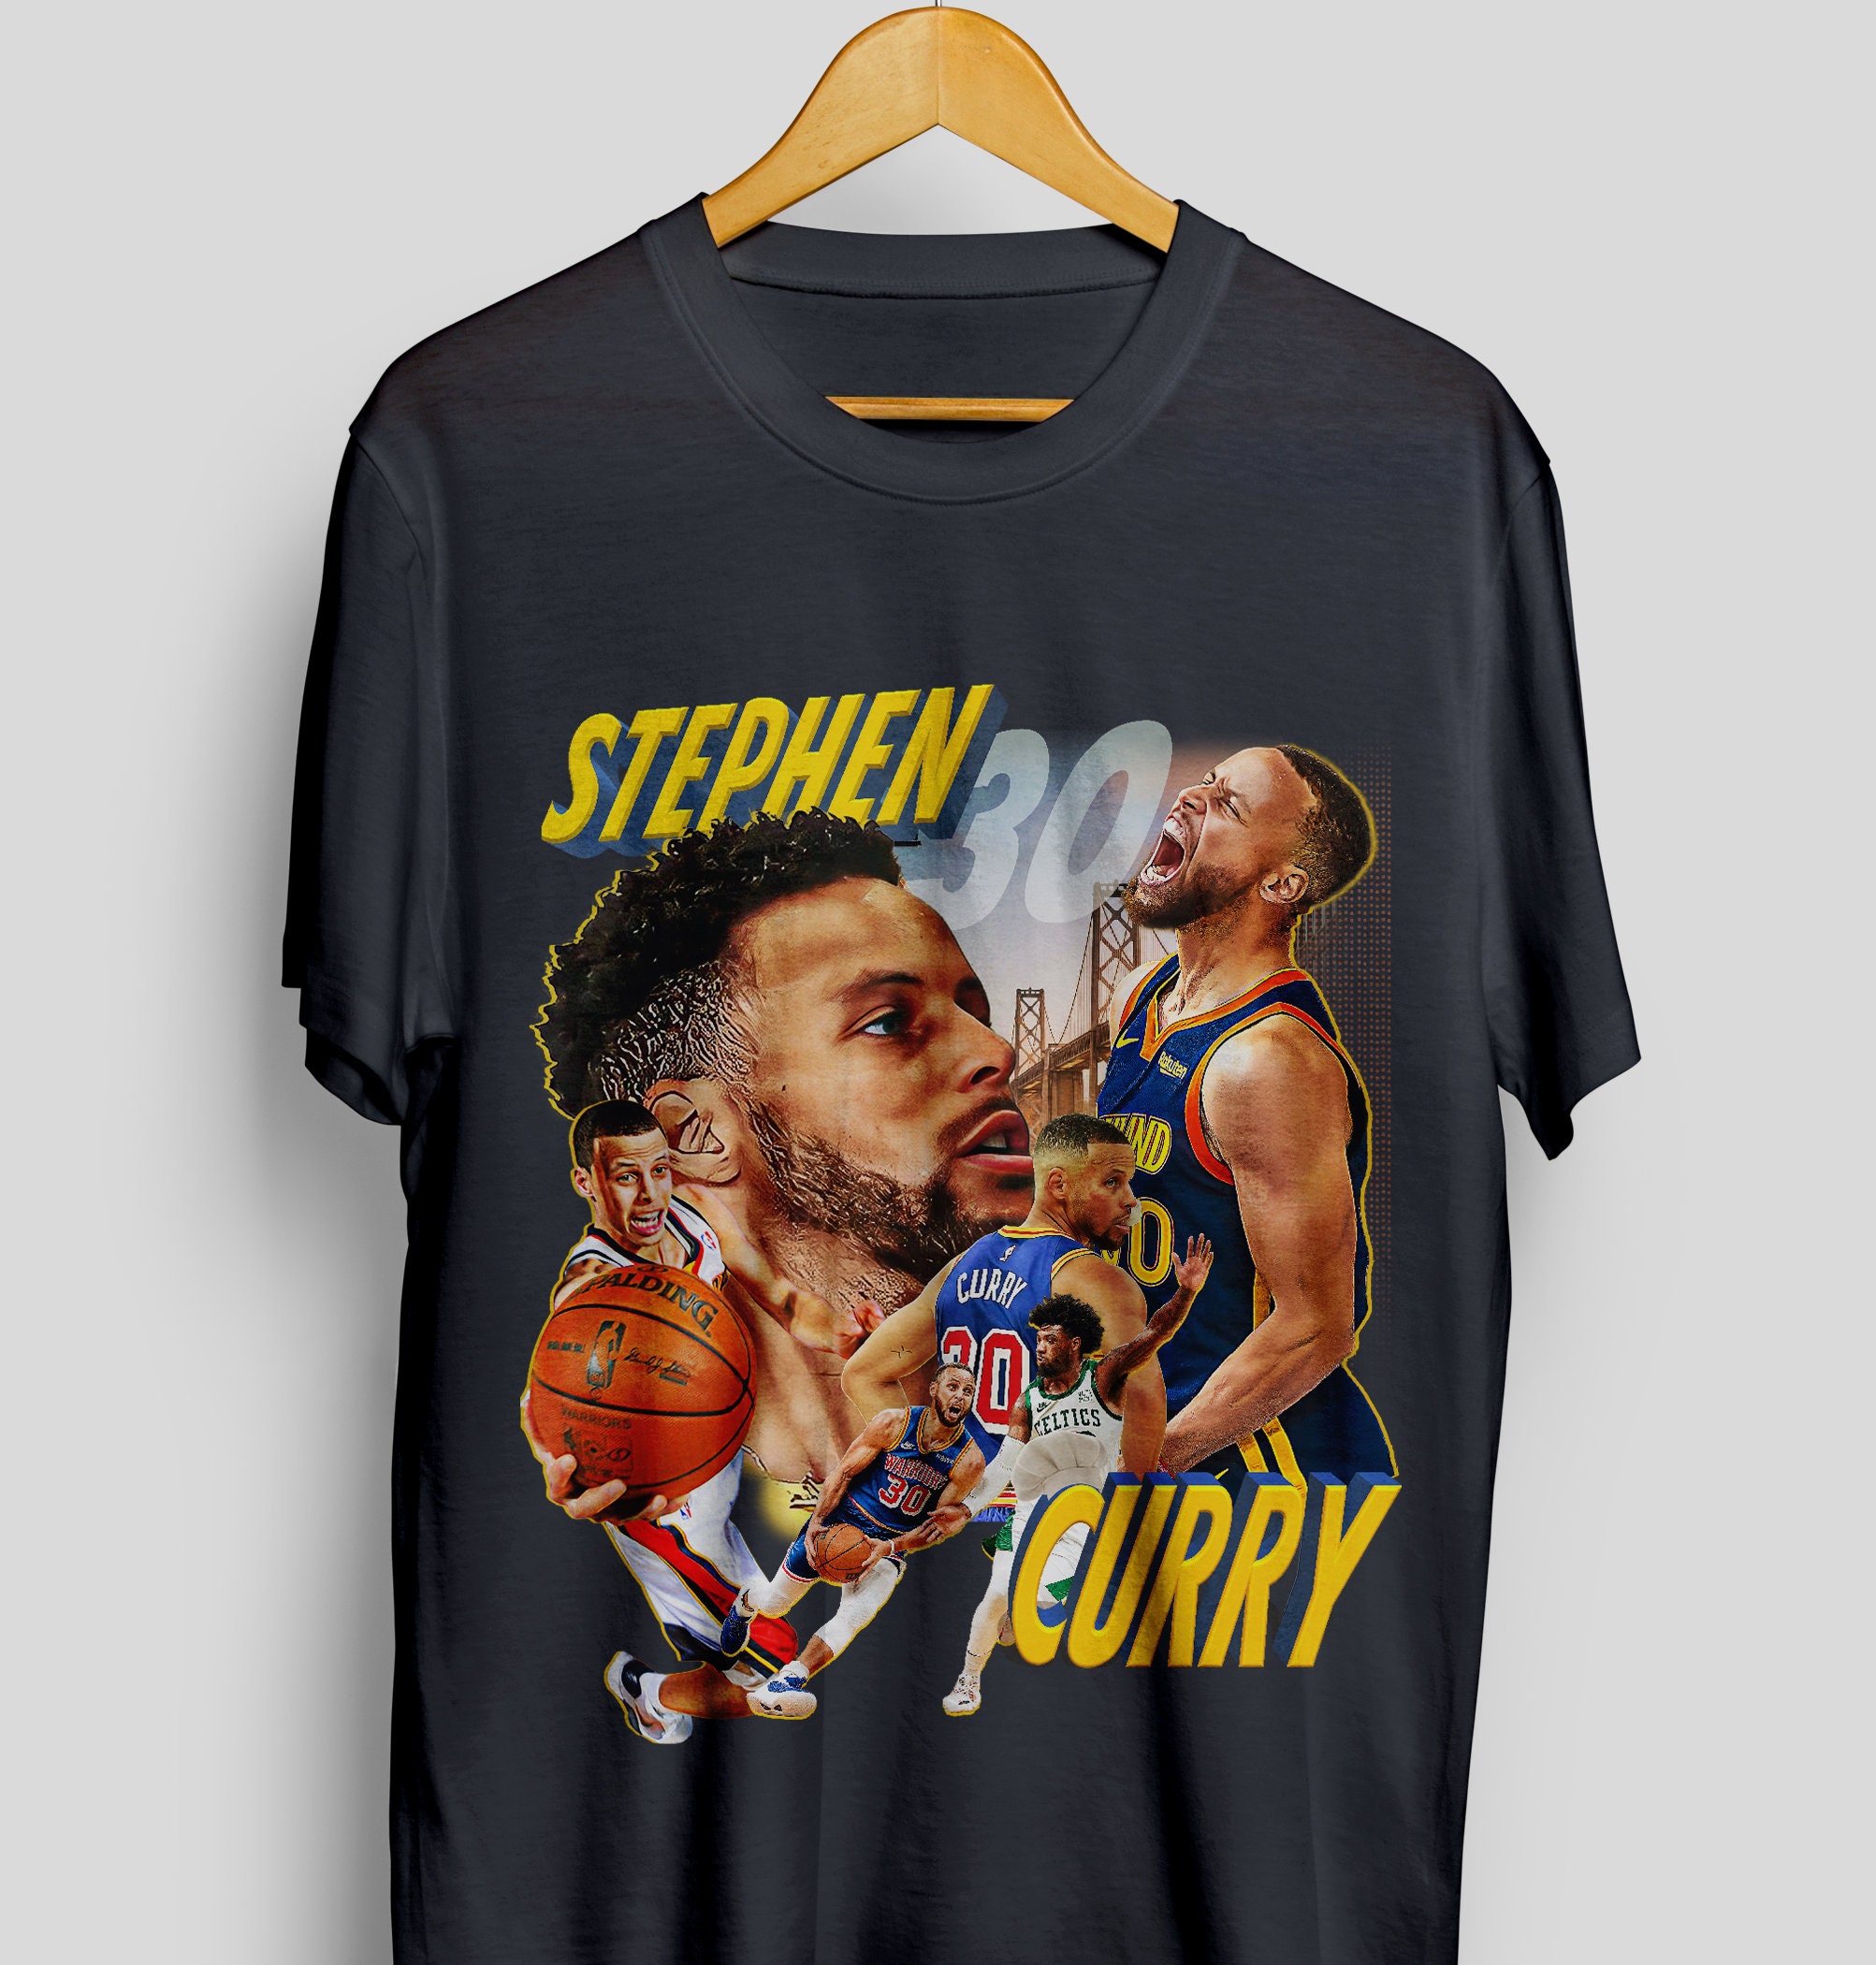 Steph Curry Vintage Style T-shirt Stephen Curry Retro NBA 